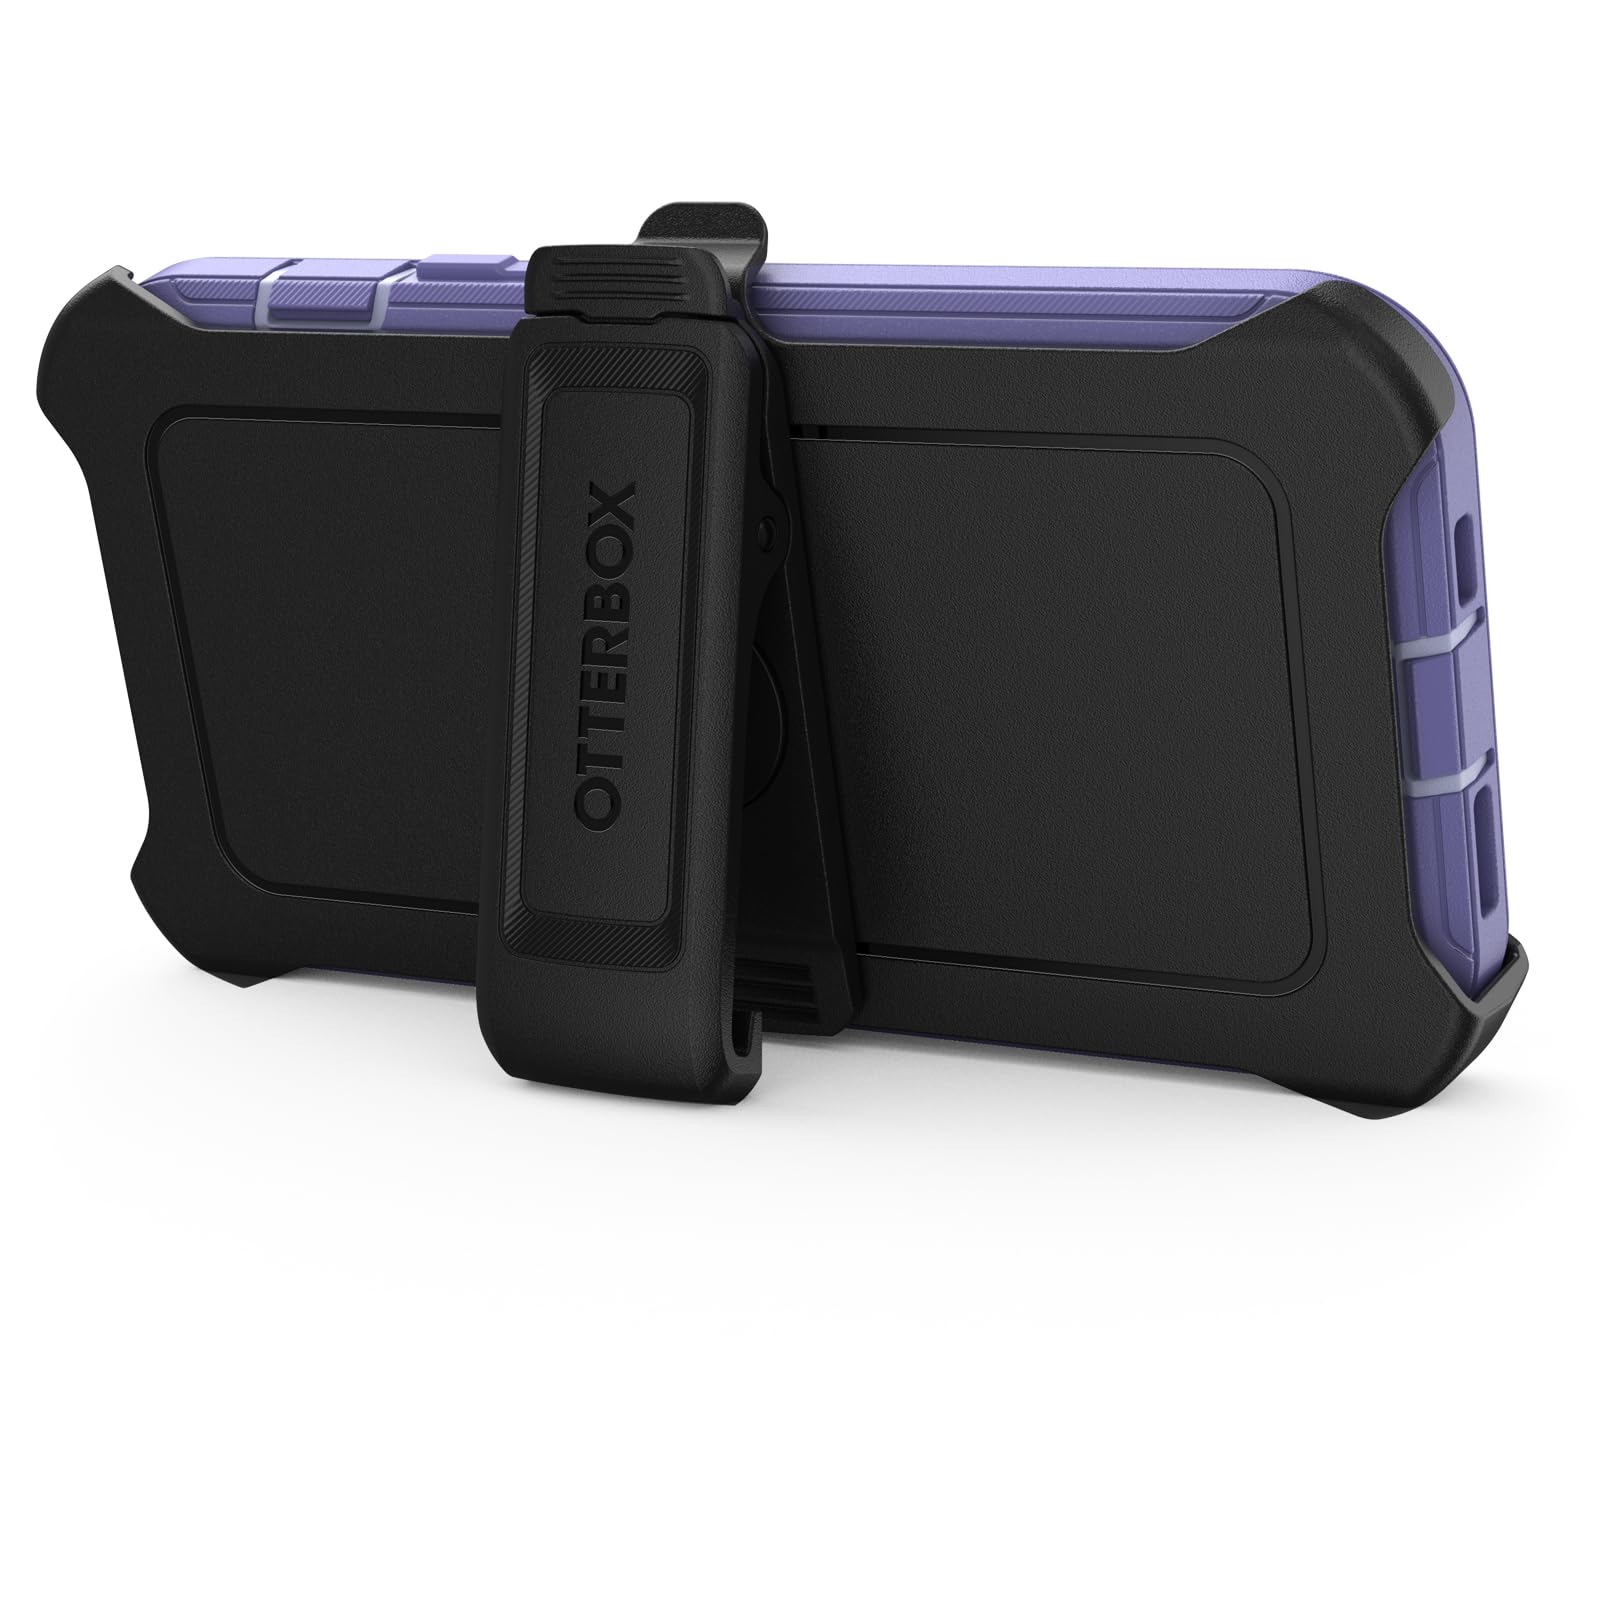 OtterBox iPhone 15, iPhone 14, and iPhone 13 Defender Series Case - MOUNTAIN MAJESTY (Purple), screenless, rugged & durable, with port protection, includes holster clip kickstand